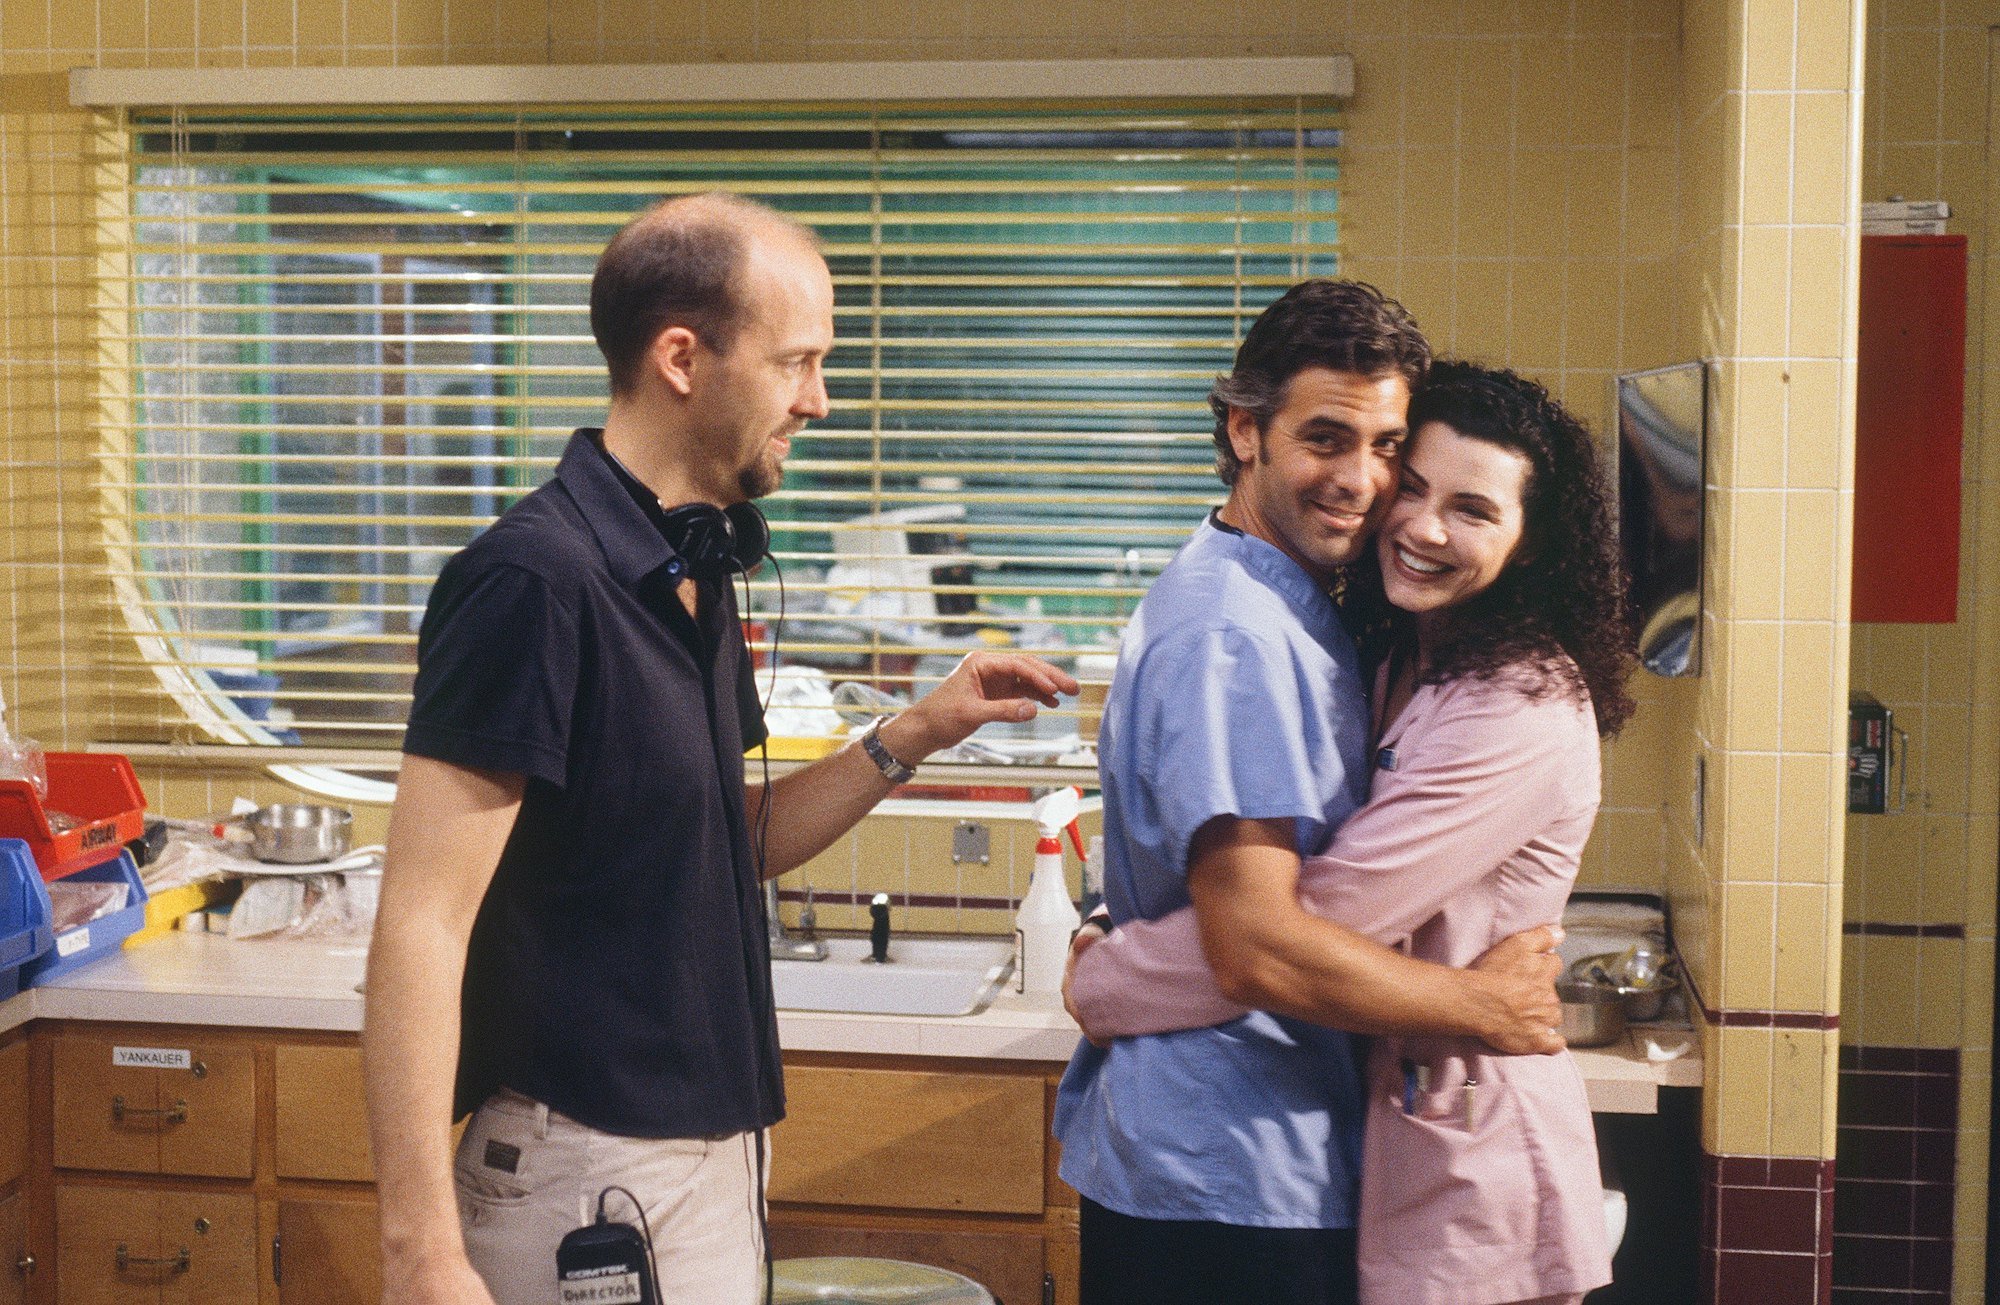 Anthony Edwards (director), George Clooney as Doctor Doug Ross, Julianna Margulies as Nurse Carol Hathaway